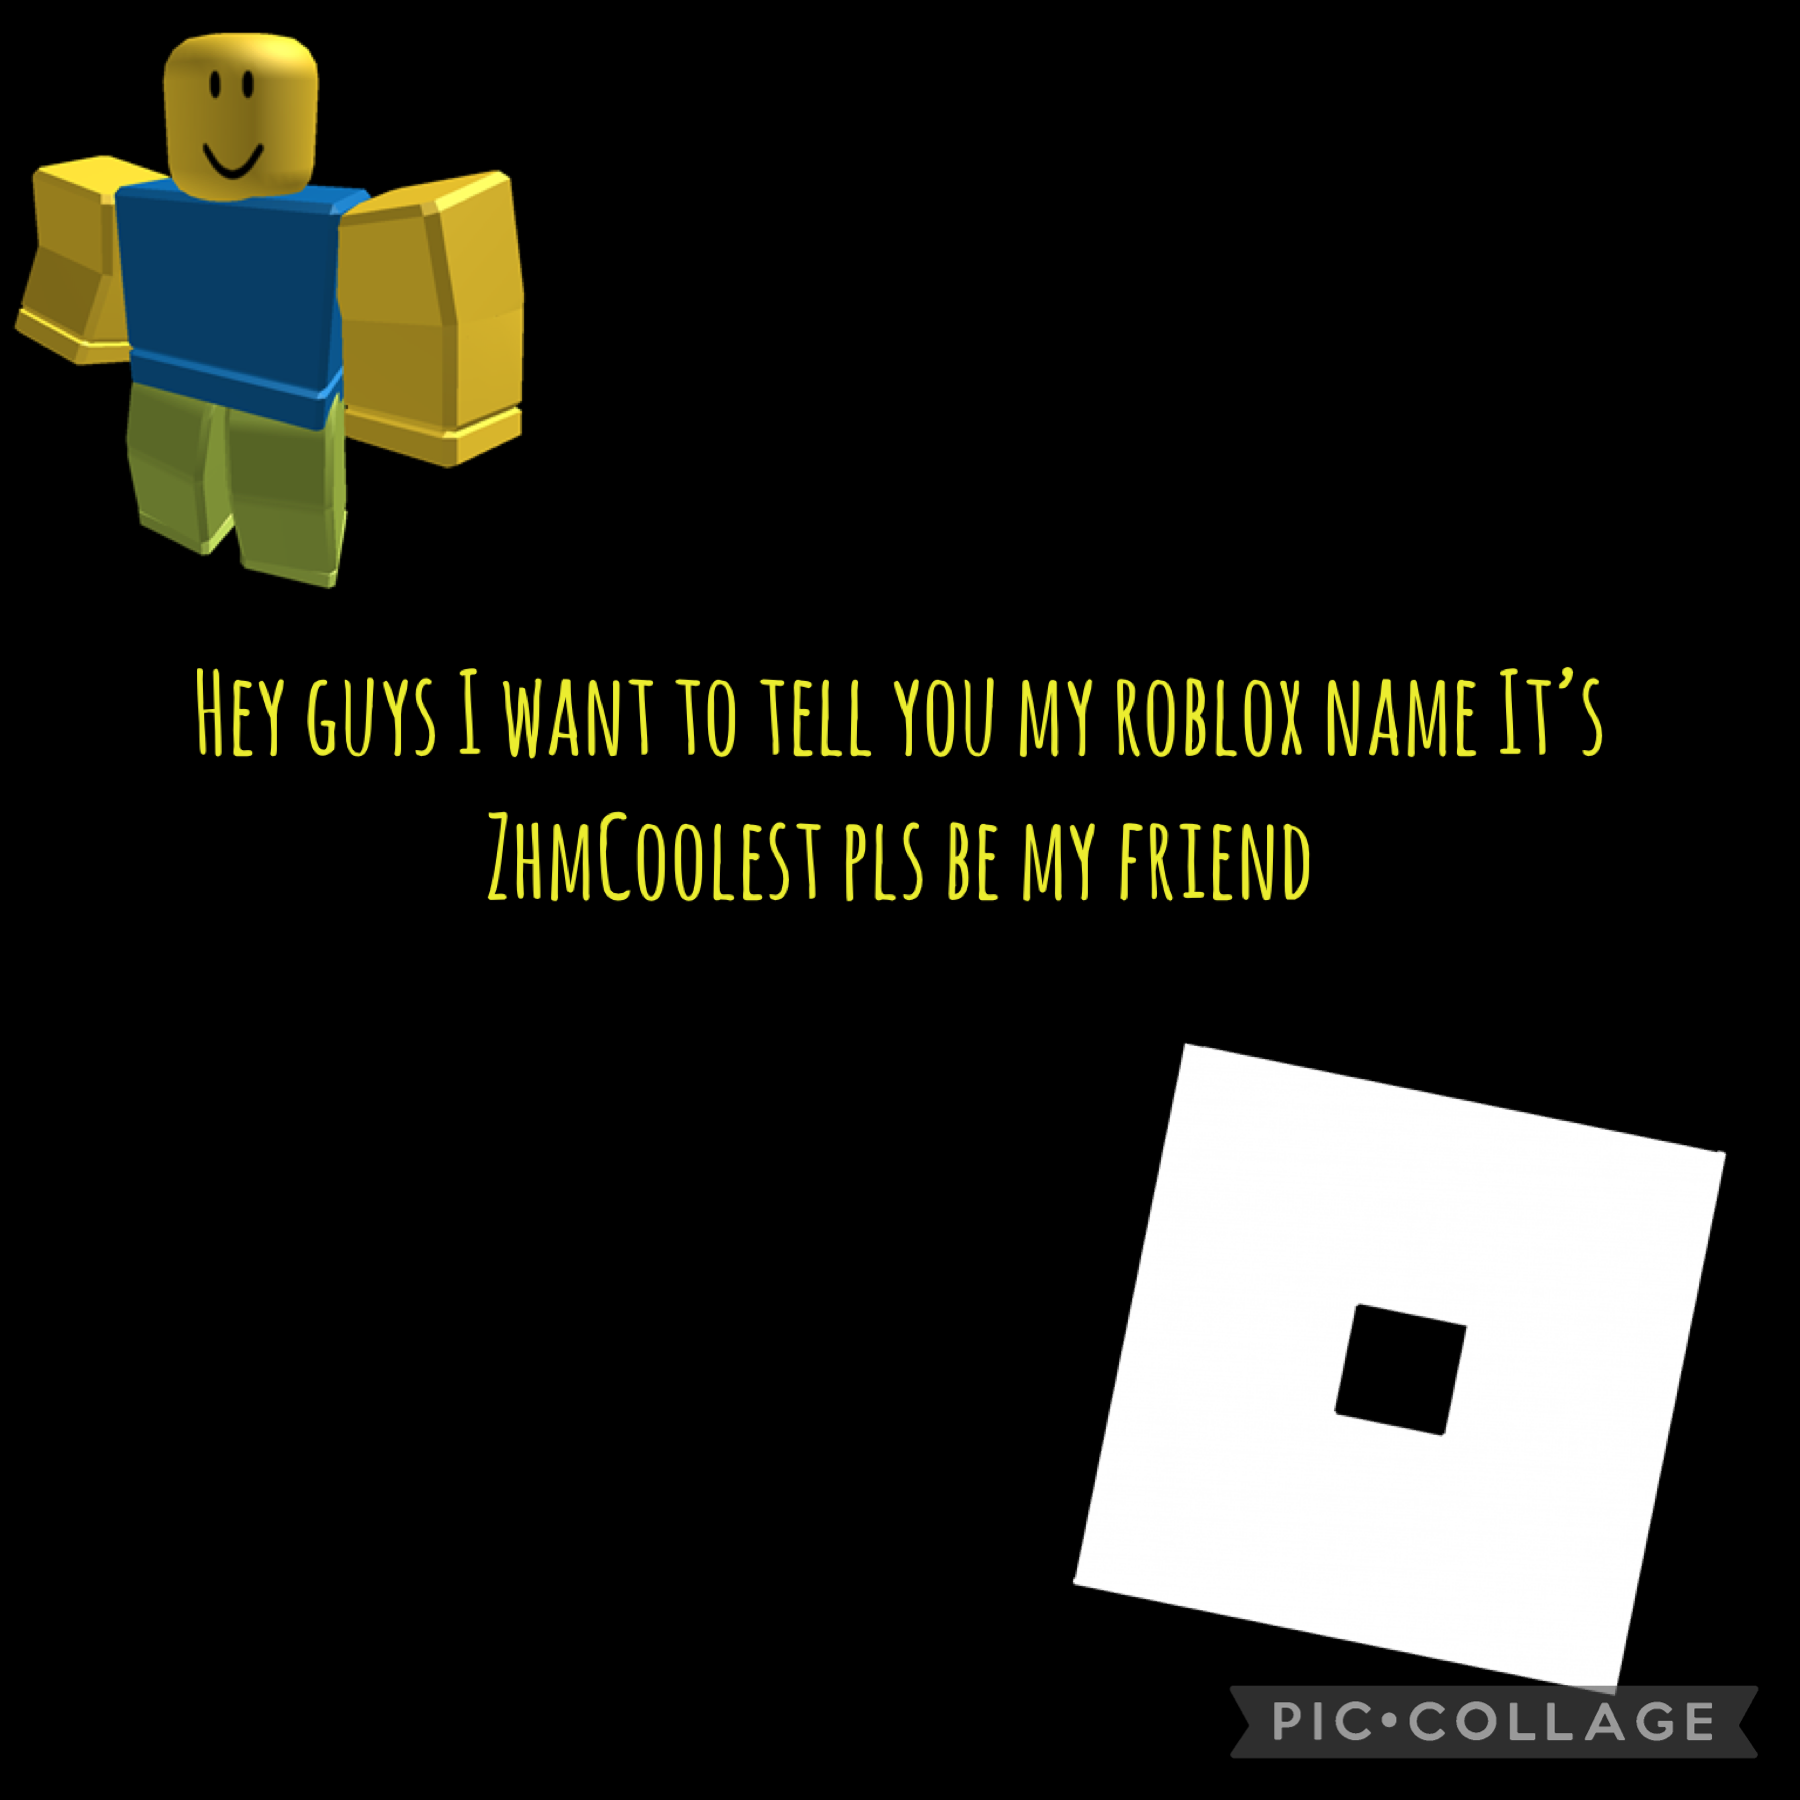 My name in roblox
